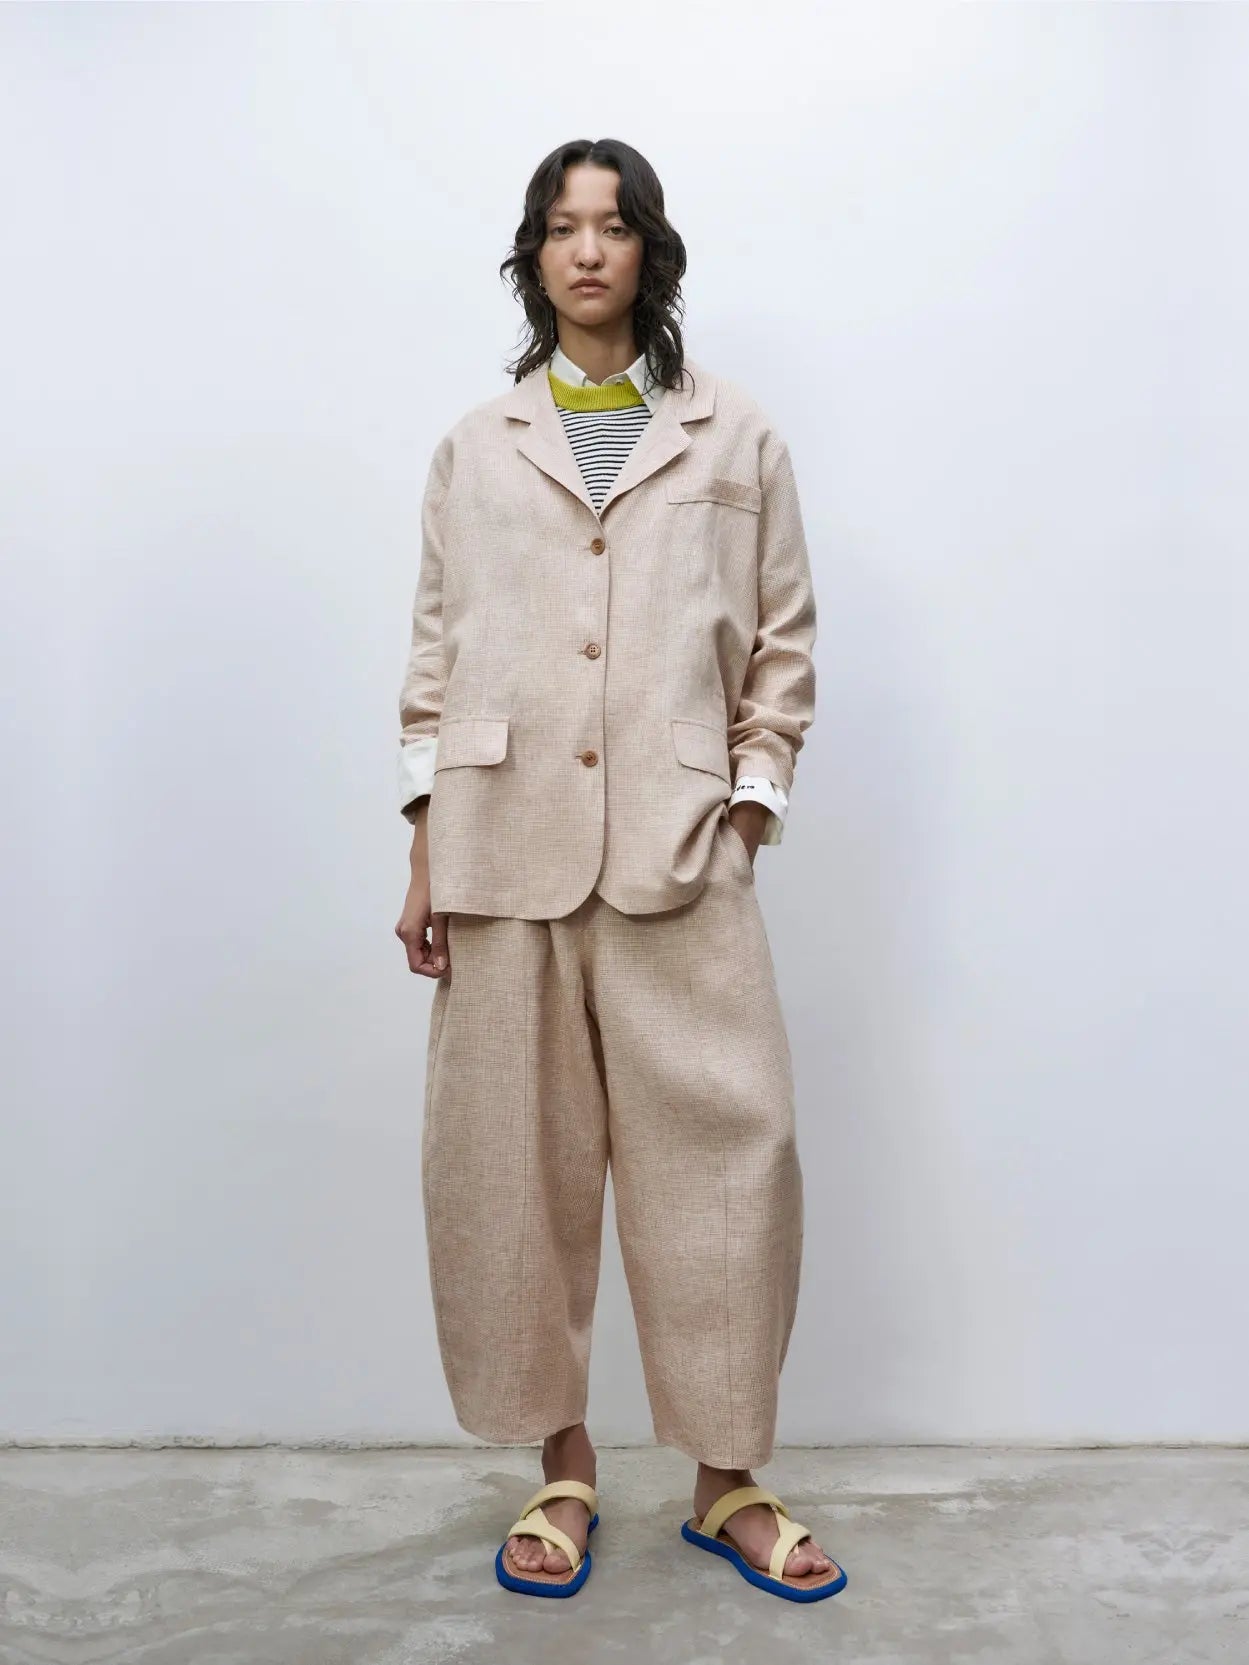 A chic pair of beige, loose-fitting Melange Linen Curved Pants from Cordera in Barcelona, featuring an elastic waistband and a button detail on the front. The straight-cut design has vertical seam lines running down each leg and ends just above the ankles, offering a stylish and comfortable fit.